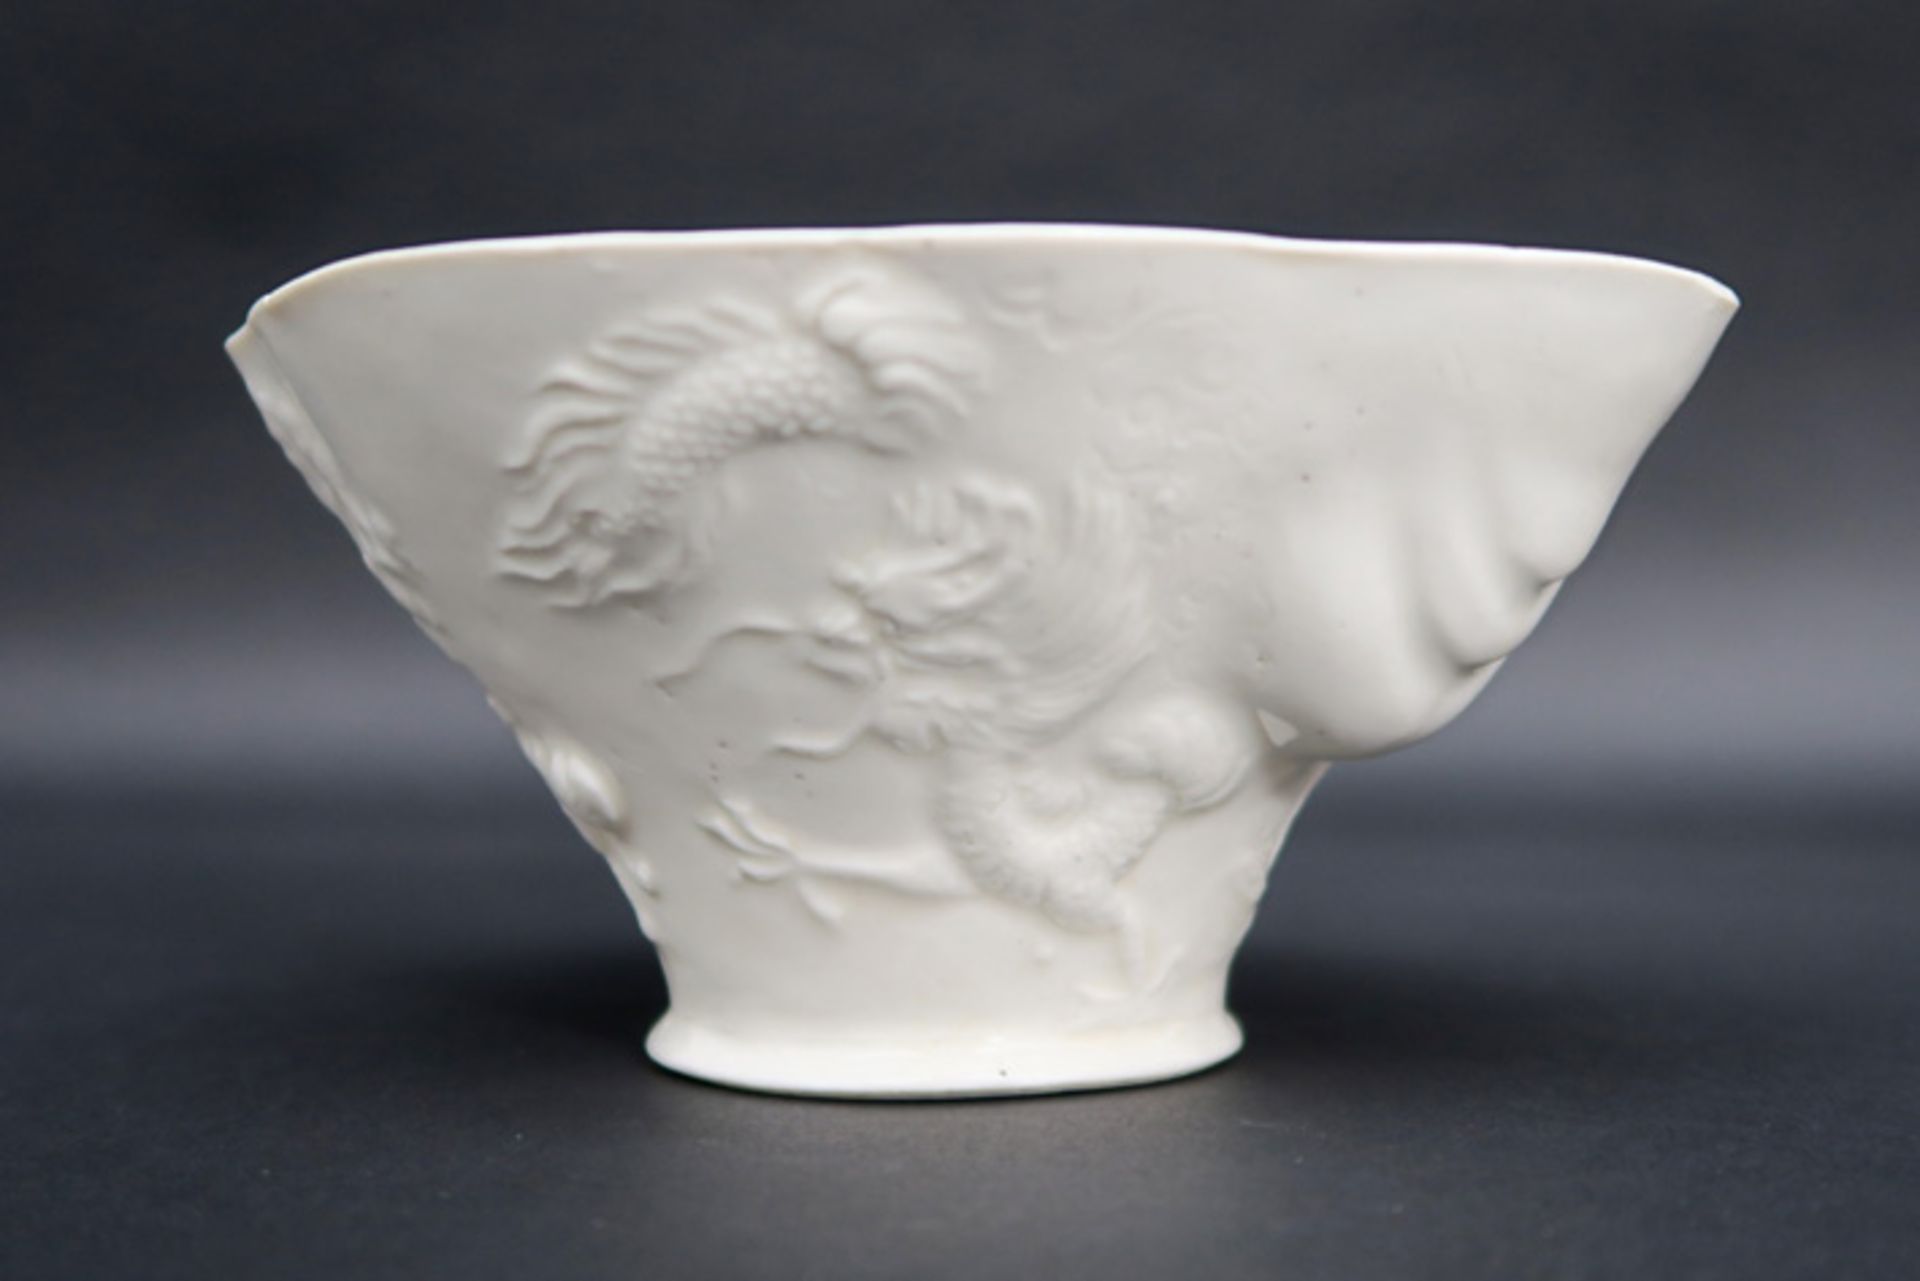 Chinese cup in "blanc de Chine" porcelain with a relief decor with mythical animals (deer,